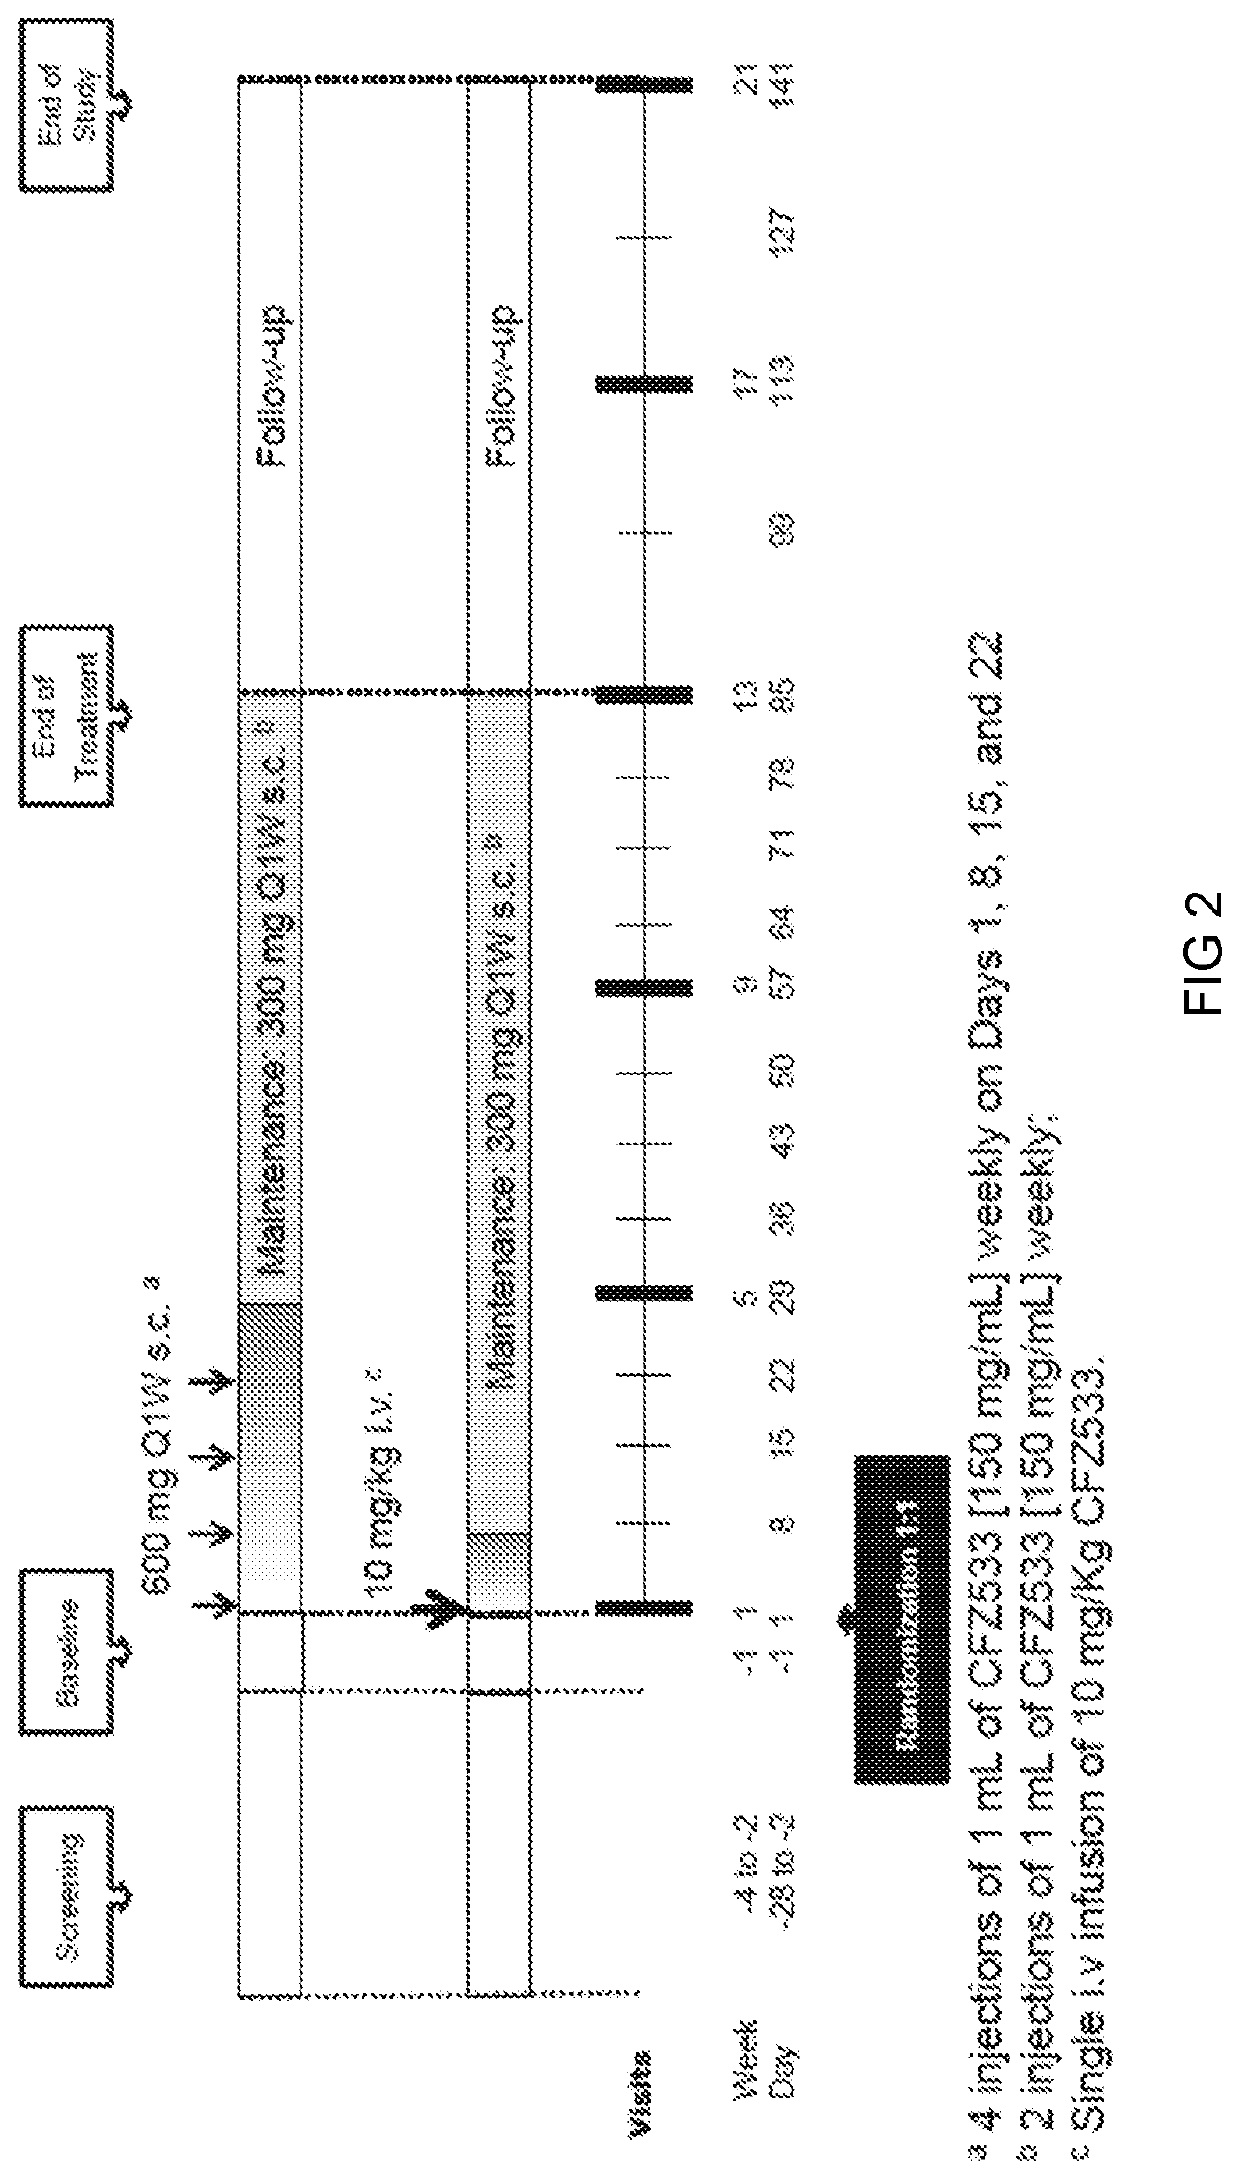 Anti-cd40 antibodies for use in prevention of graft rejection